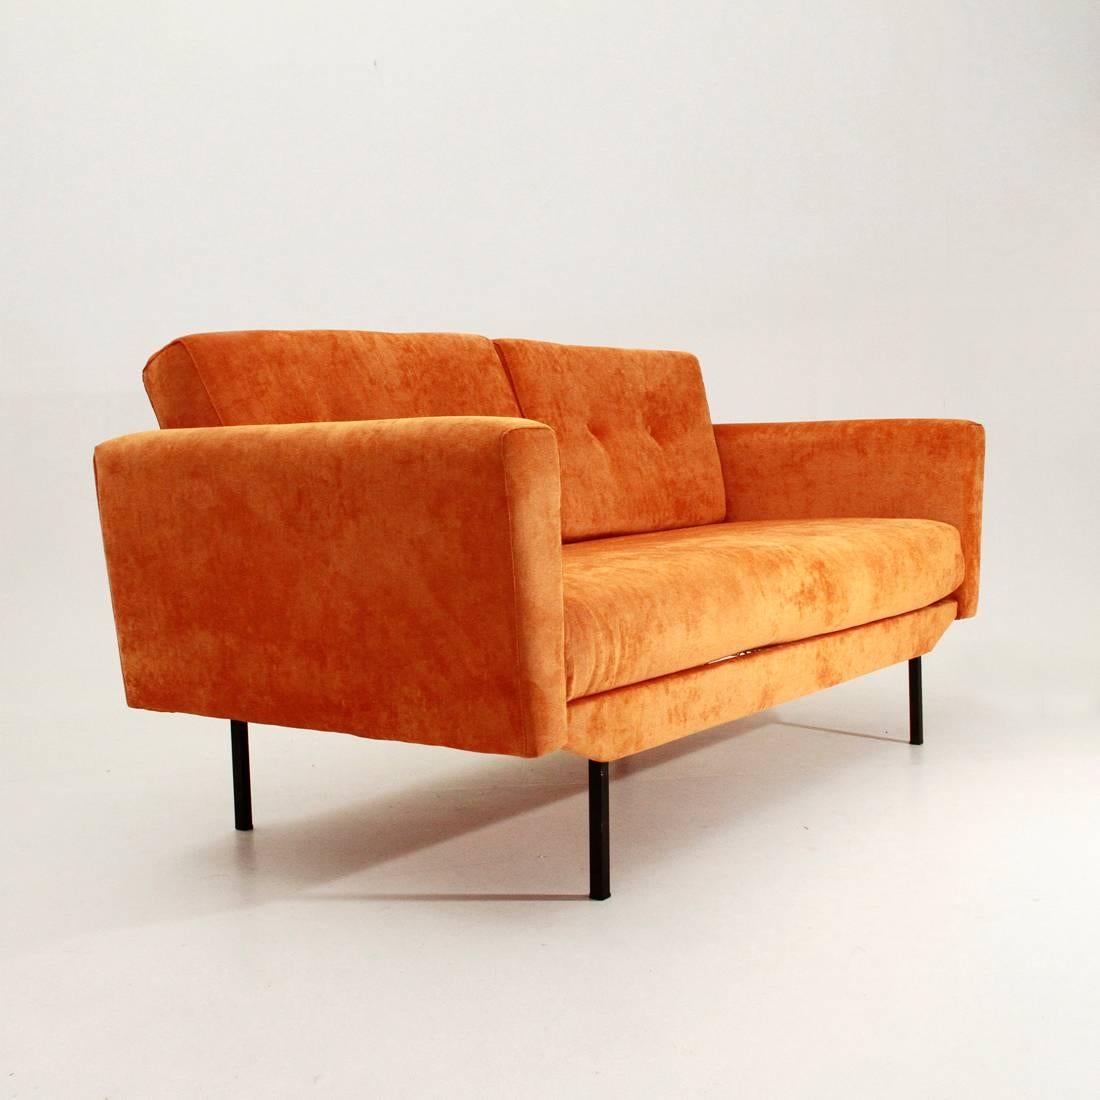 Two-seat sofa with black varnished metal frame and pillows, padded and lined with new fabric in orange velvet.
The right flank of the couch collapses, making it a bed.
Good general conditions.
Dimensions: Width 165/180 cm depth 75 cm height 79 cm